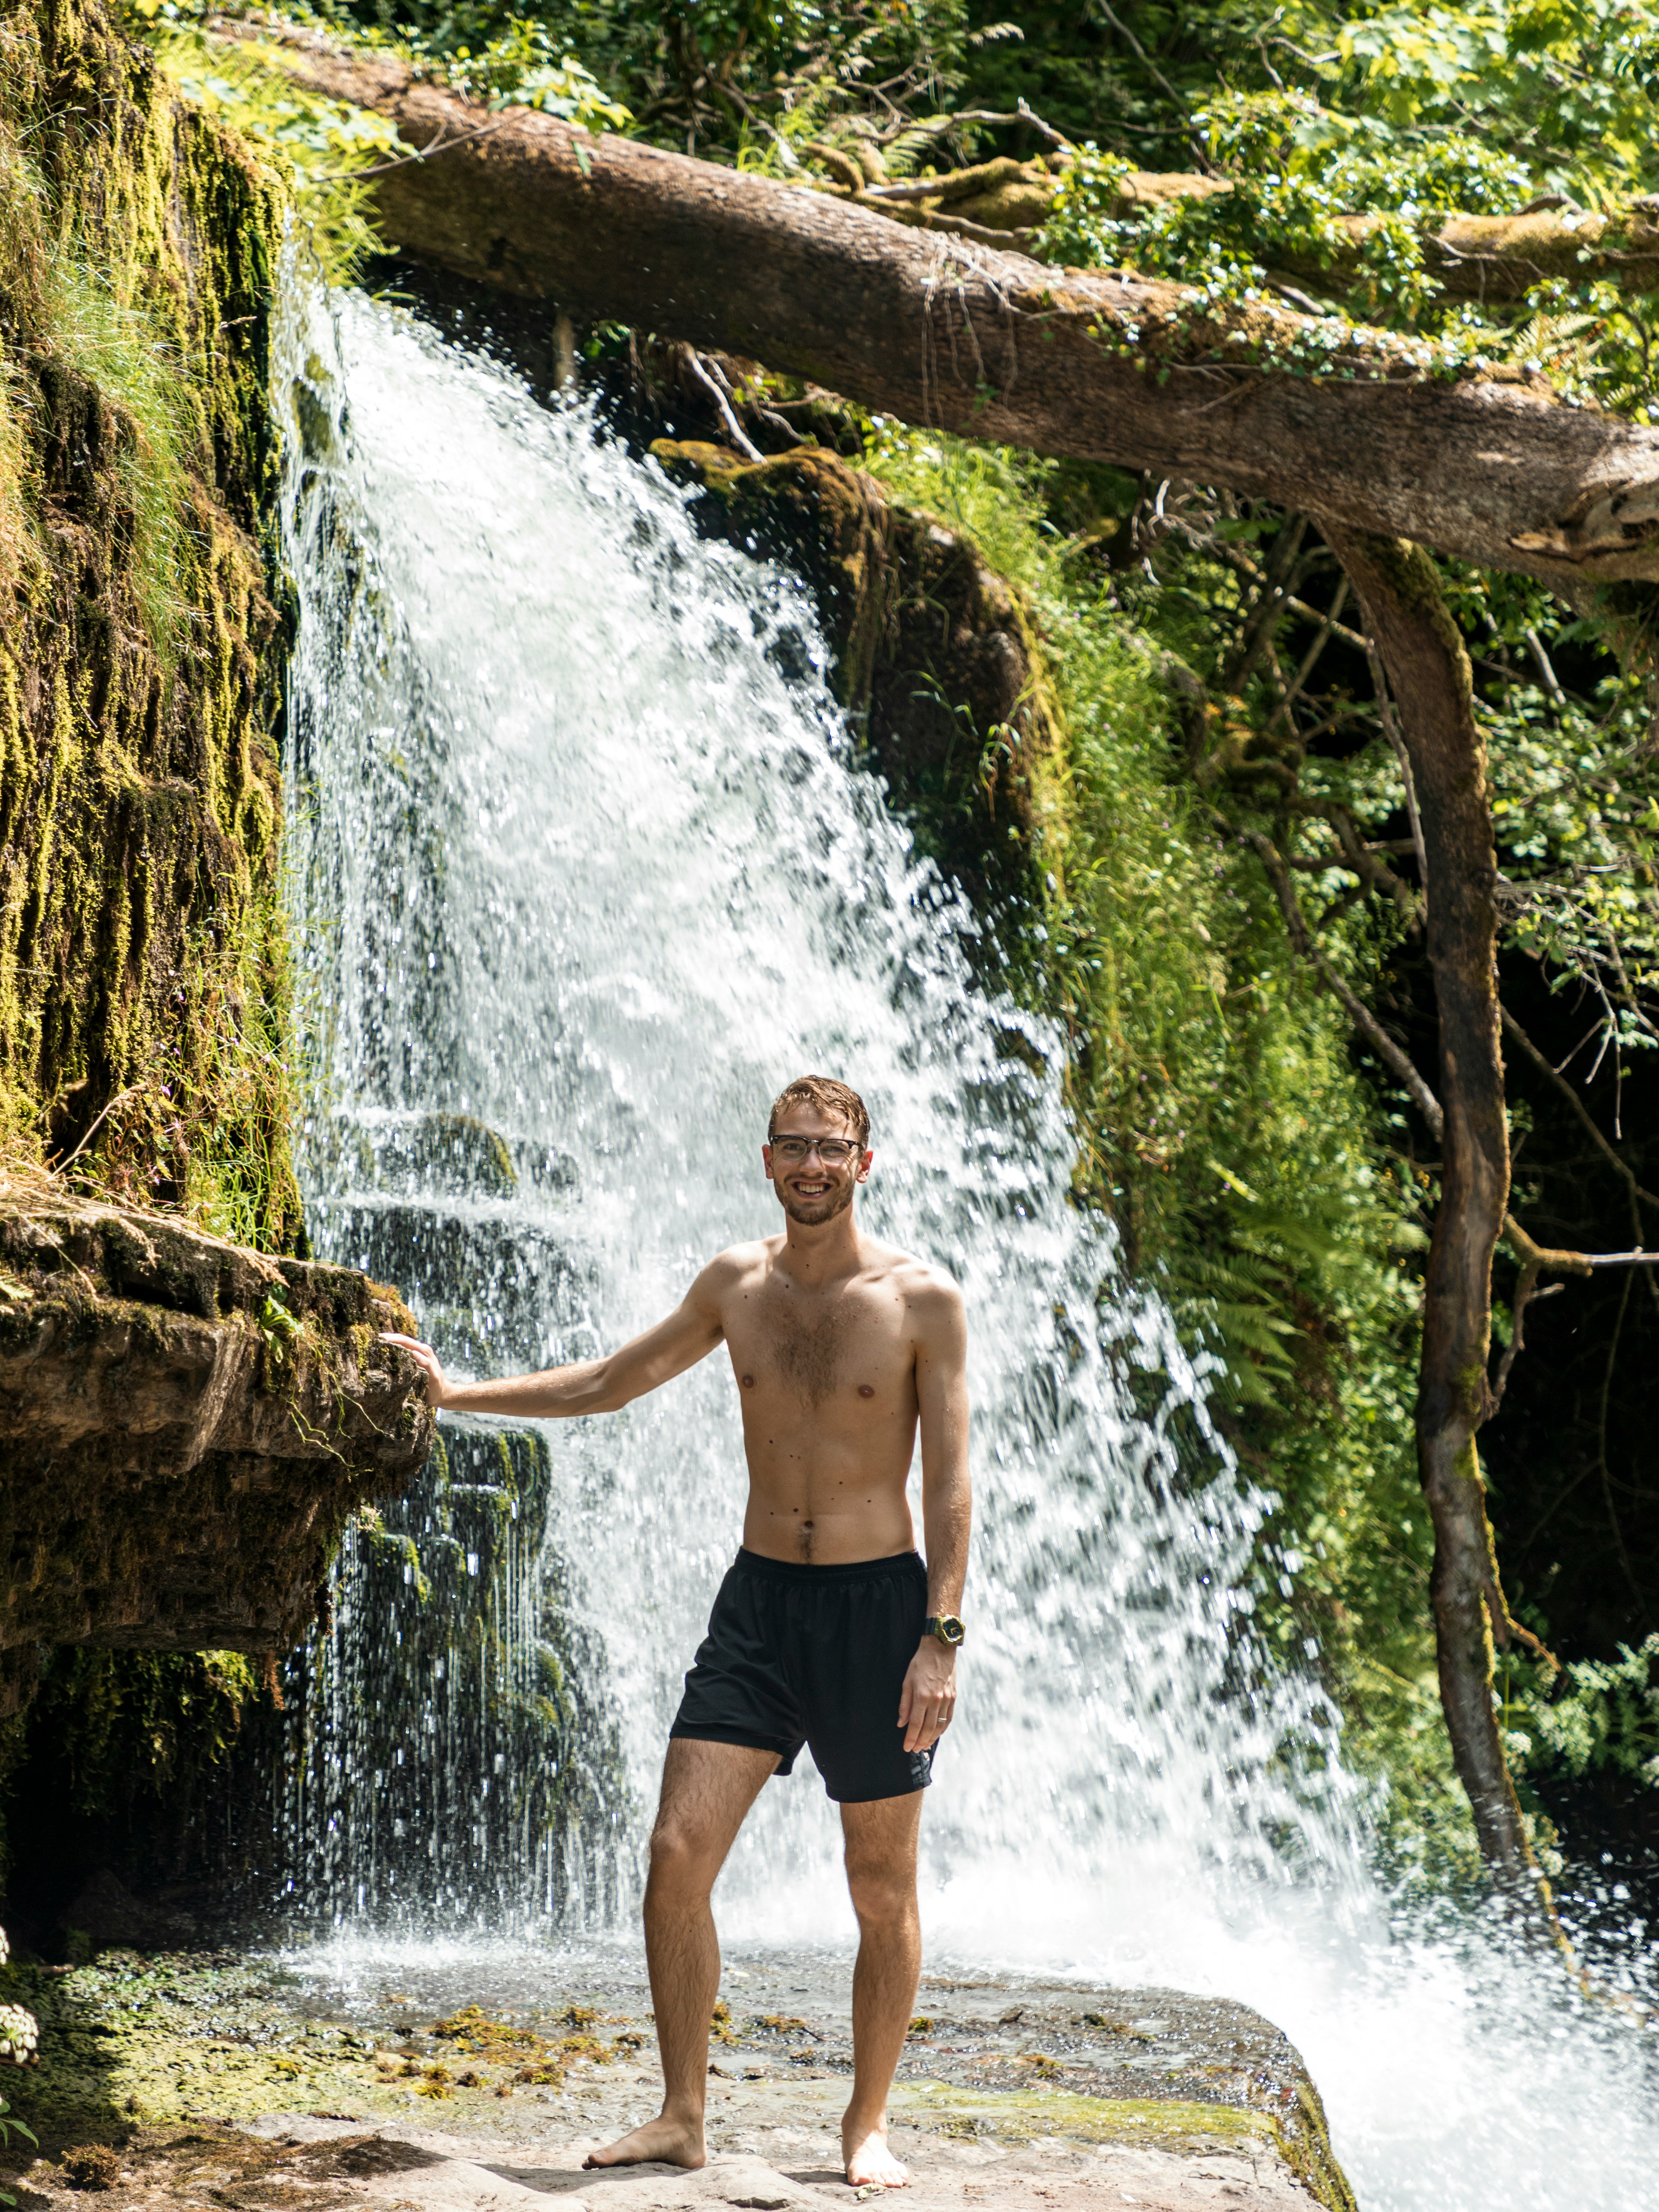 man in blue shorts standing on brown rock near water falls during daytime